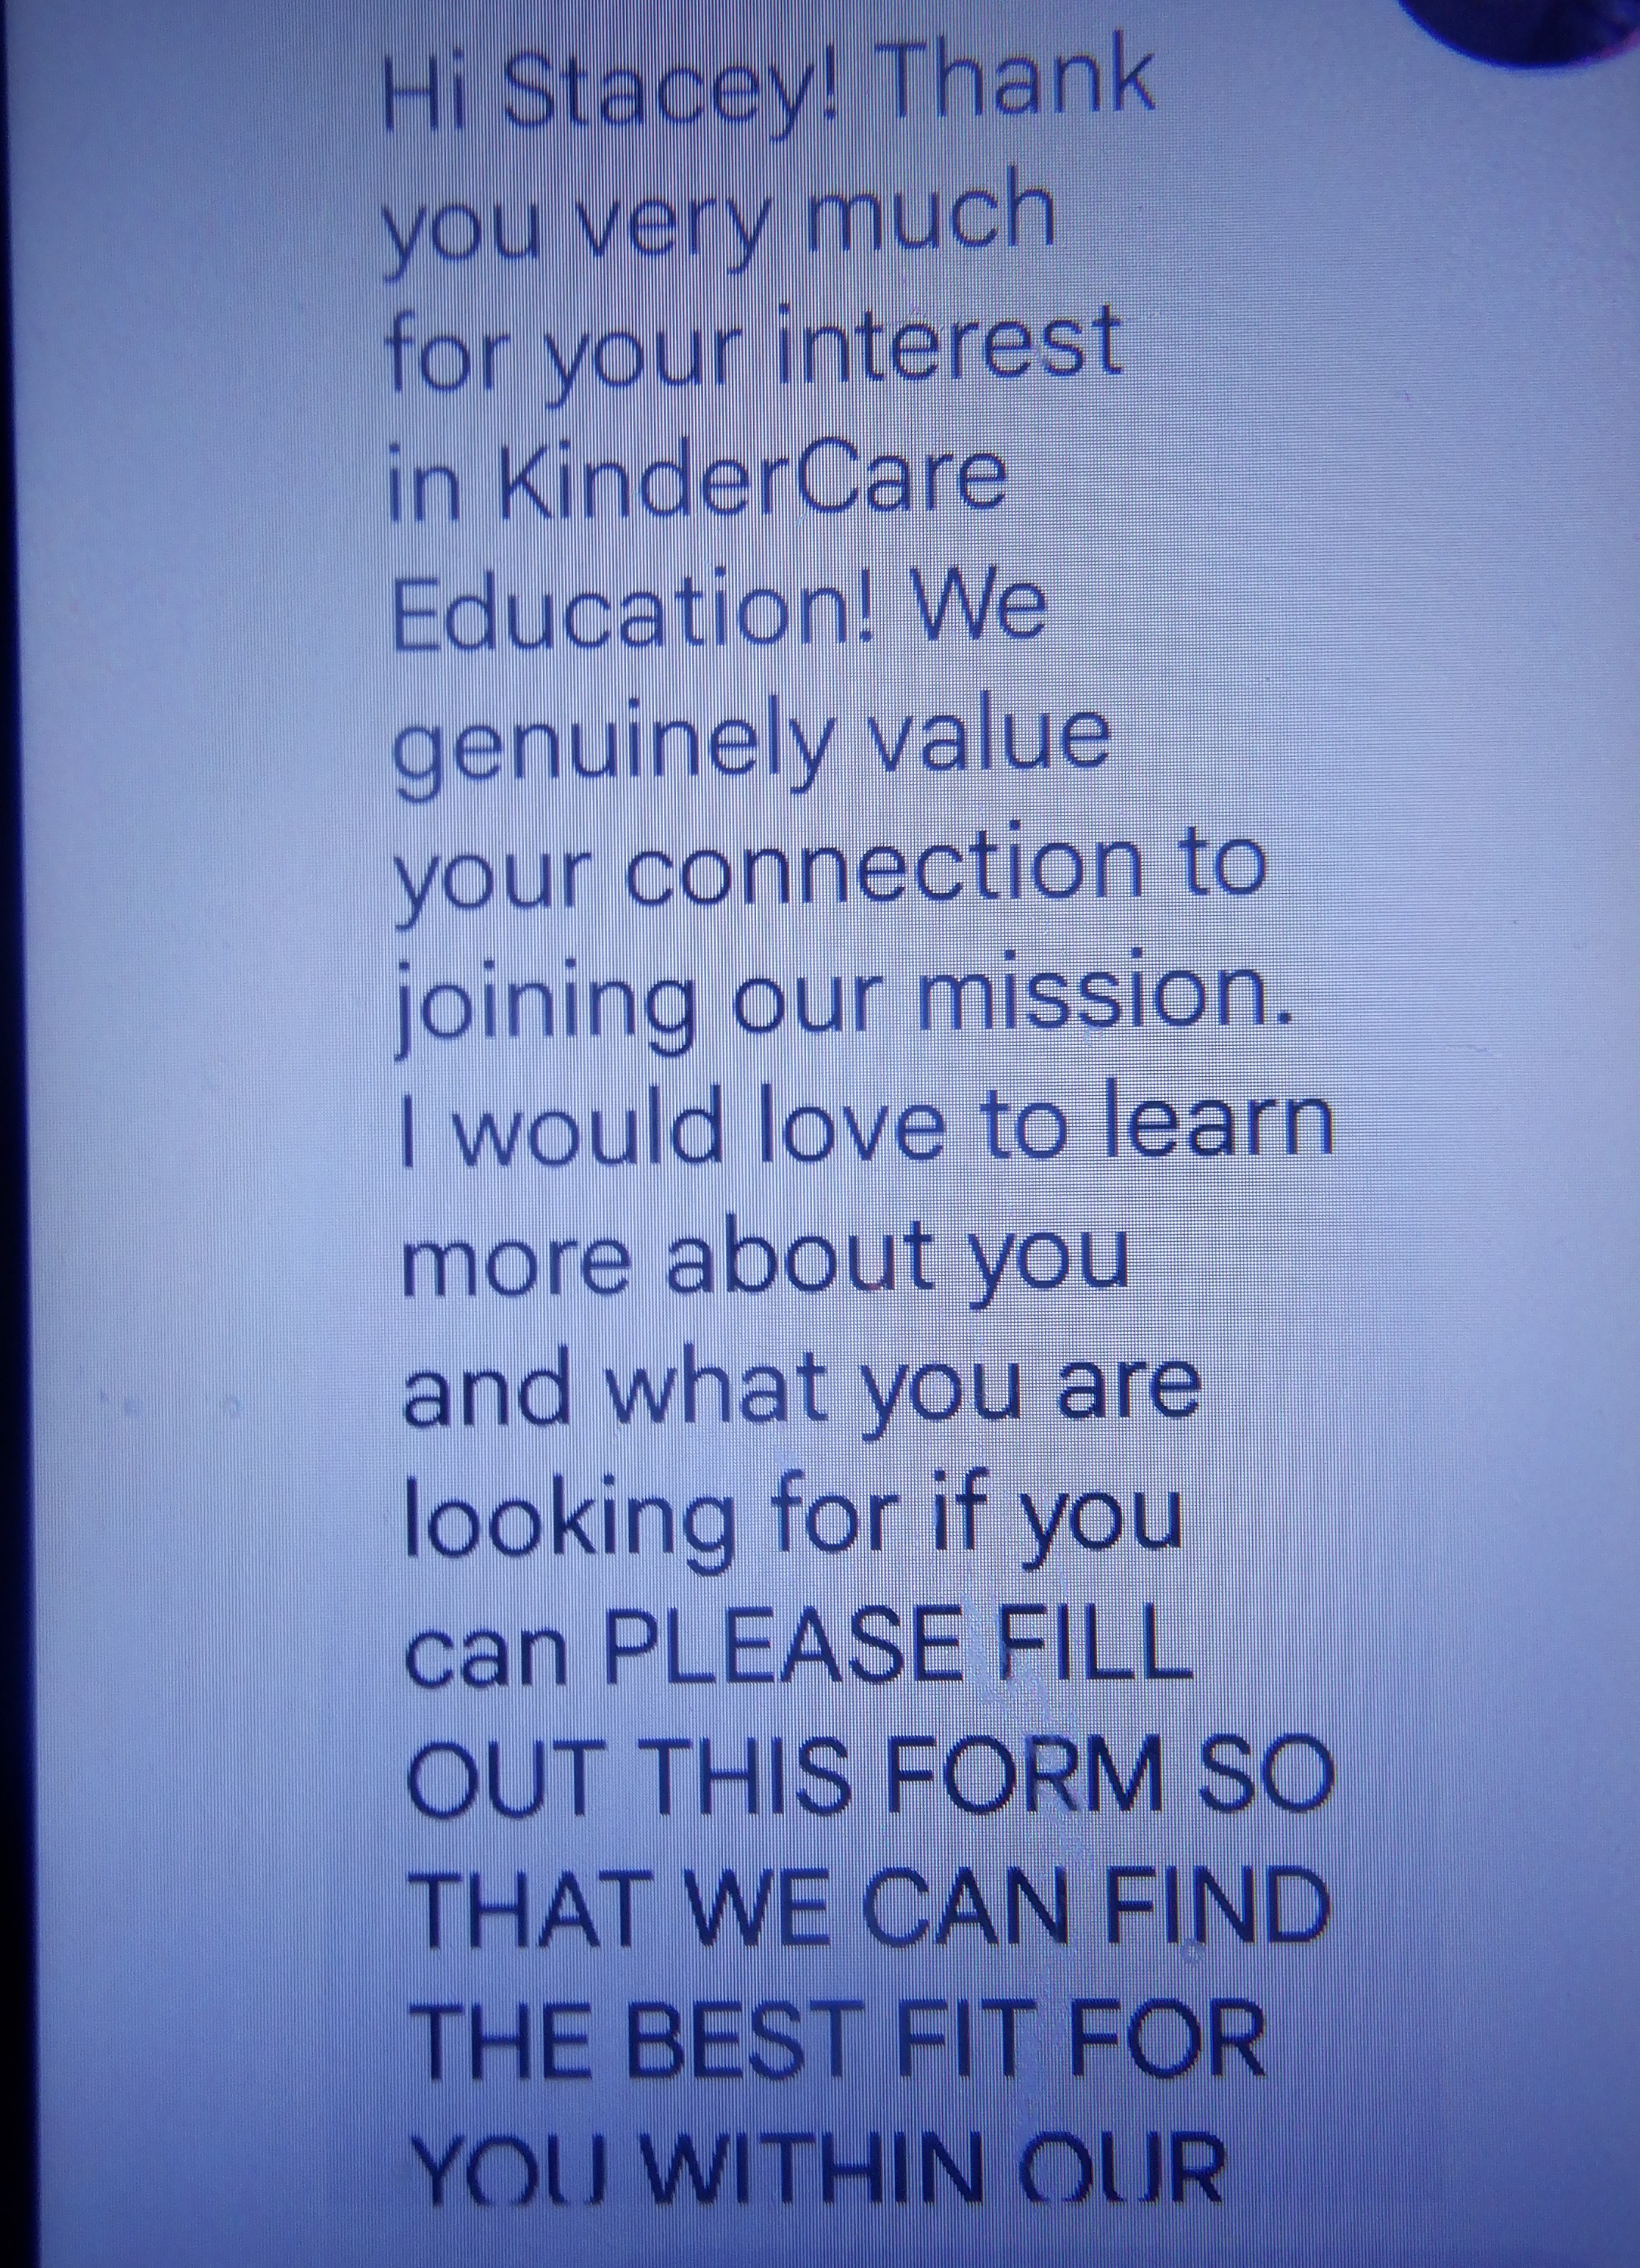 Photo I took of my phone with the text from the job I showed interest in.